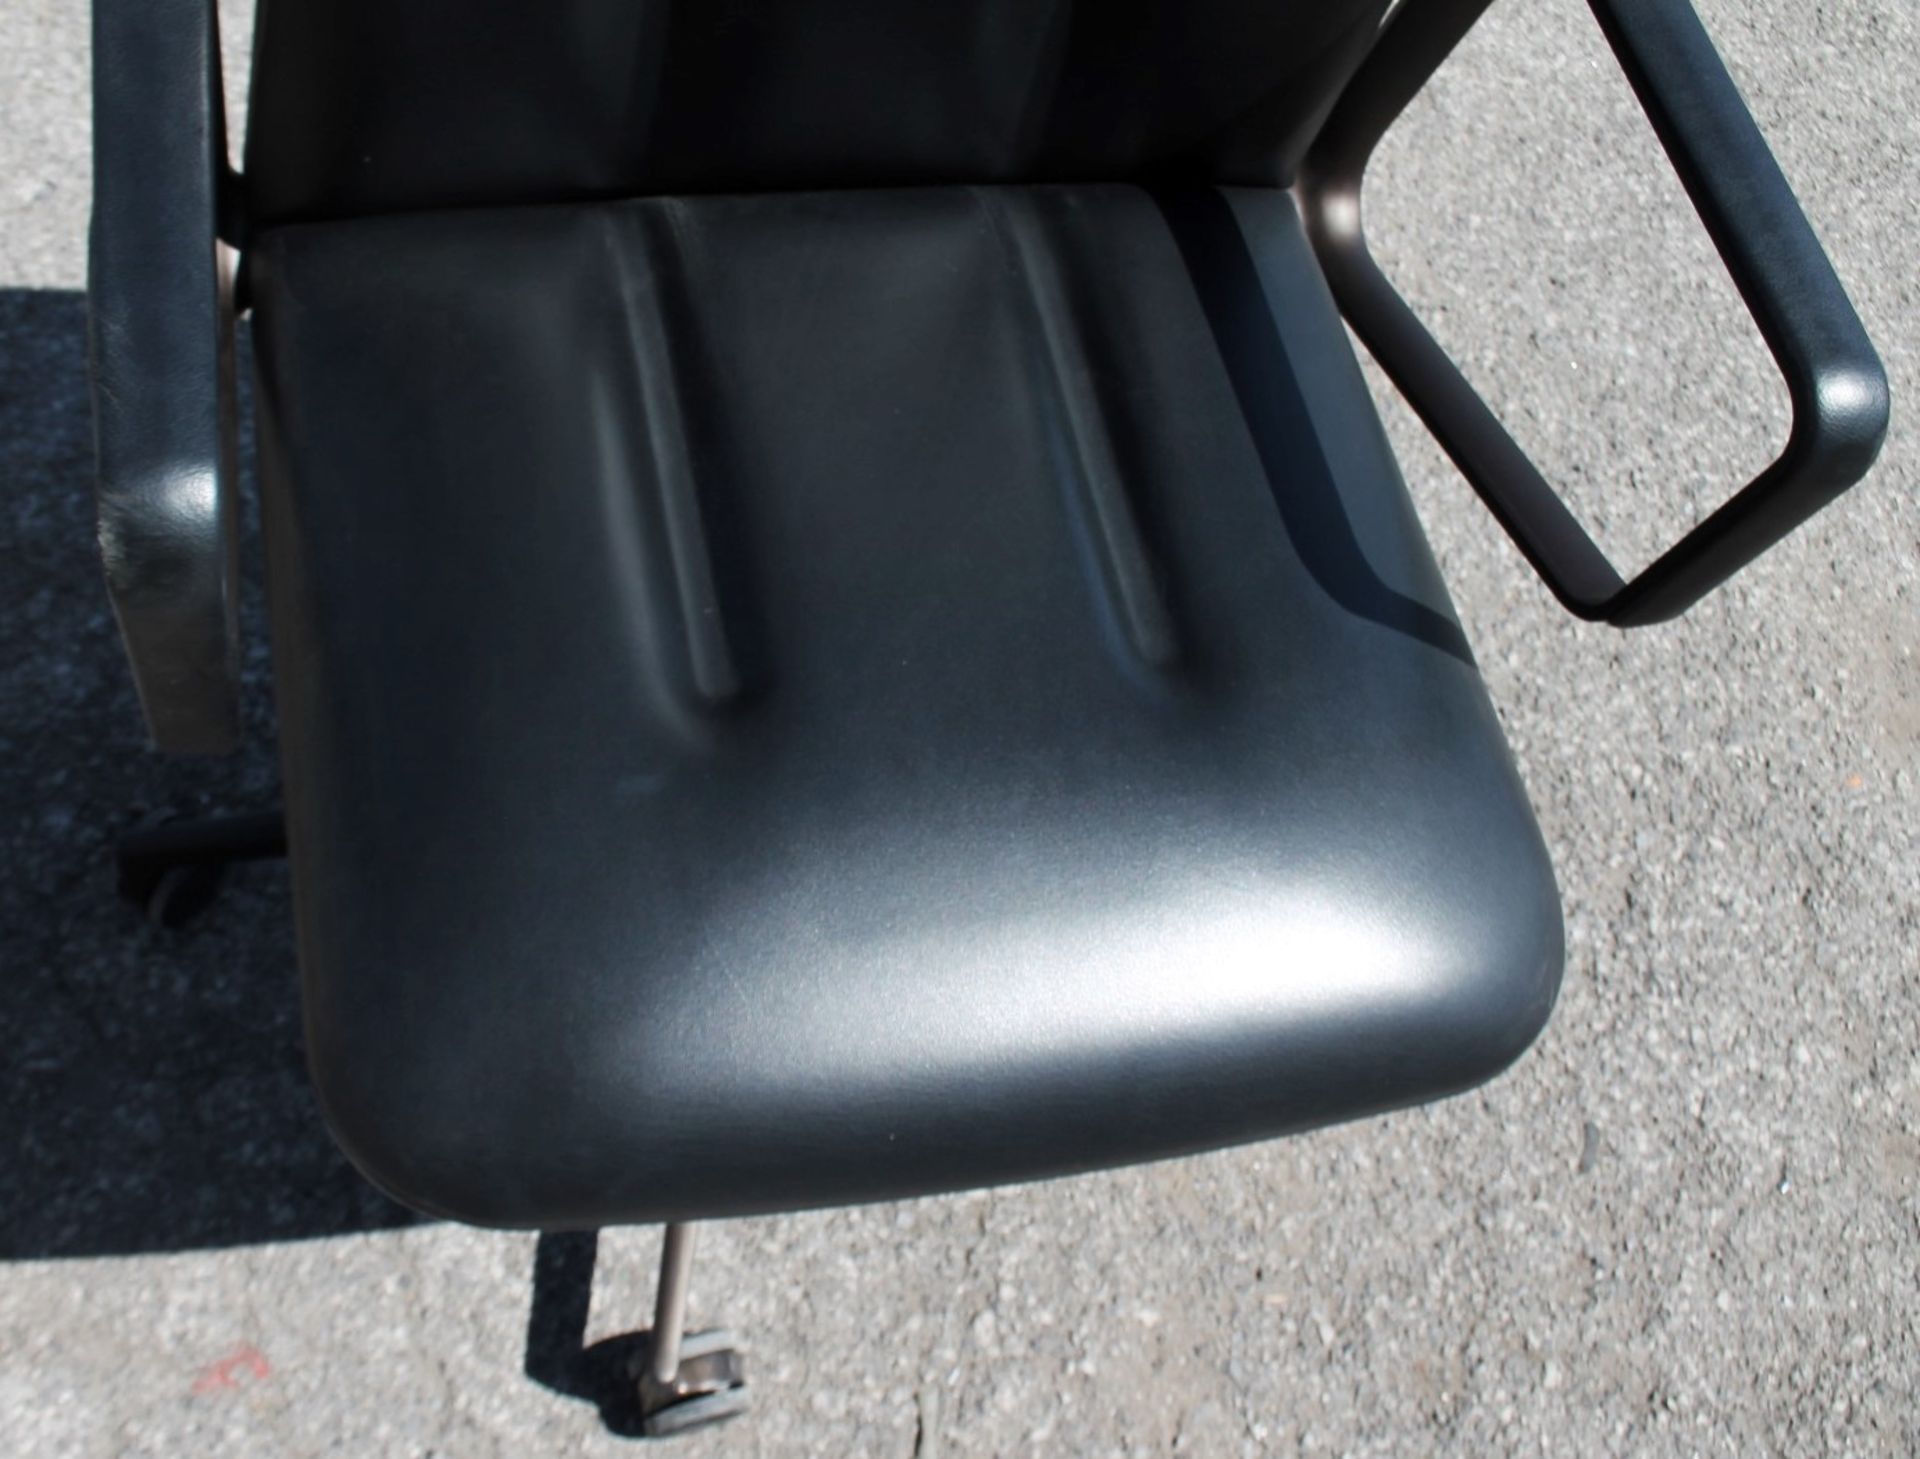 1 x WALTER KNOLL 'Leadchair' Executive Meeting Chair In Genuine Leather - Original RRP £4,250 - Image 4 of 9